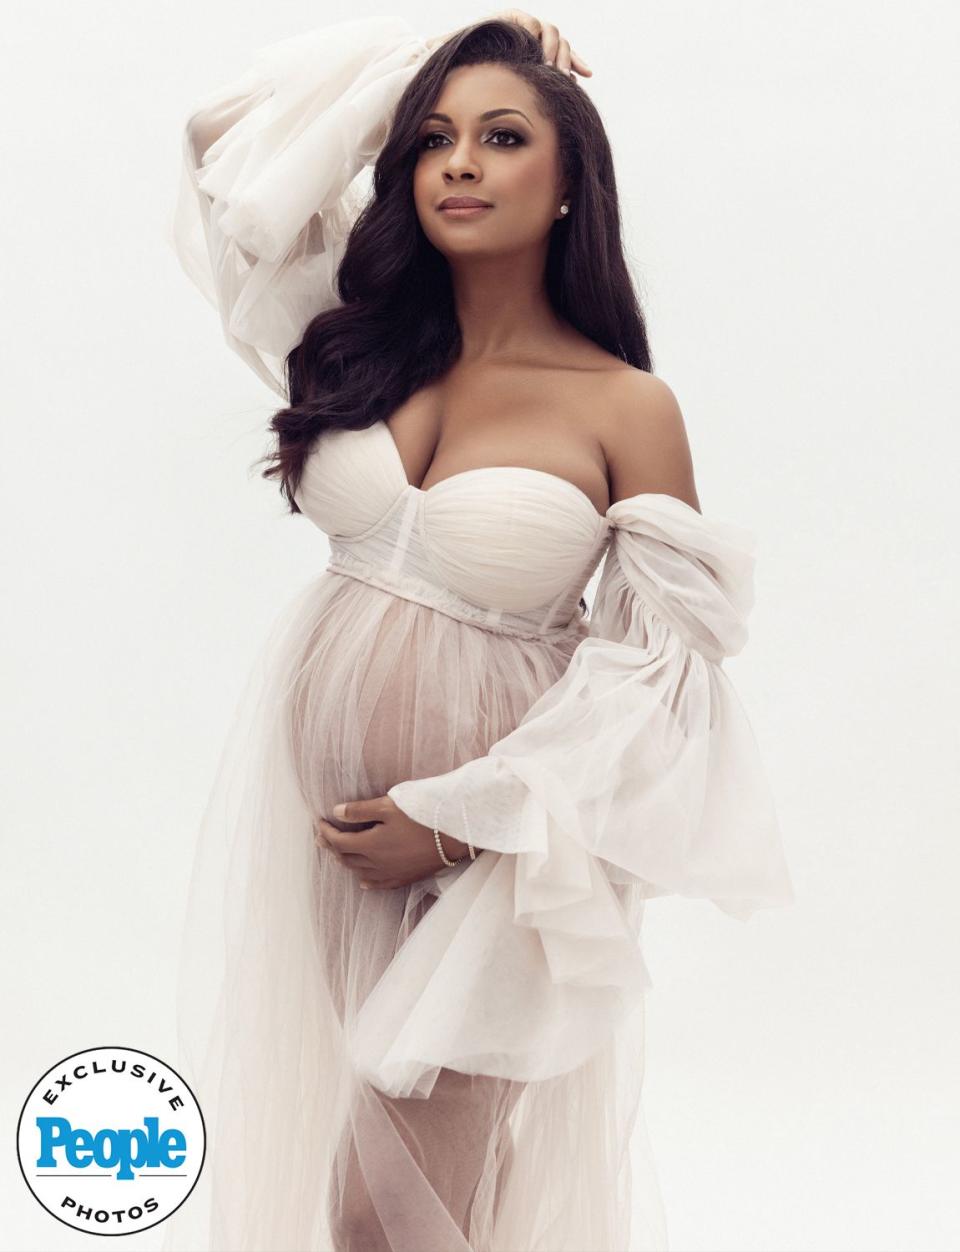 <p>Lola Melani Photography</p> Eboni K. Williams cradles her baby bump as she poses for a photoshoot to celebrate the news that she